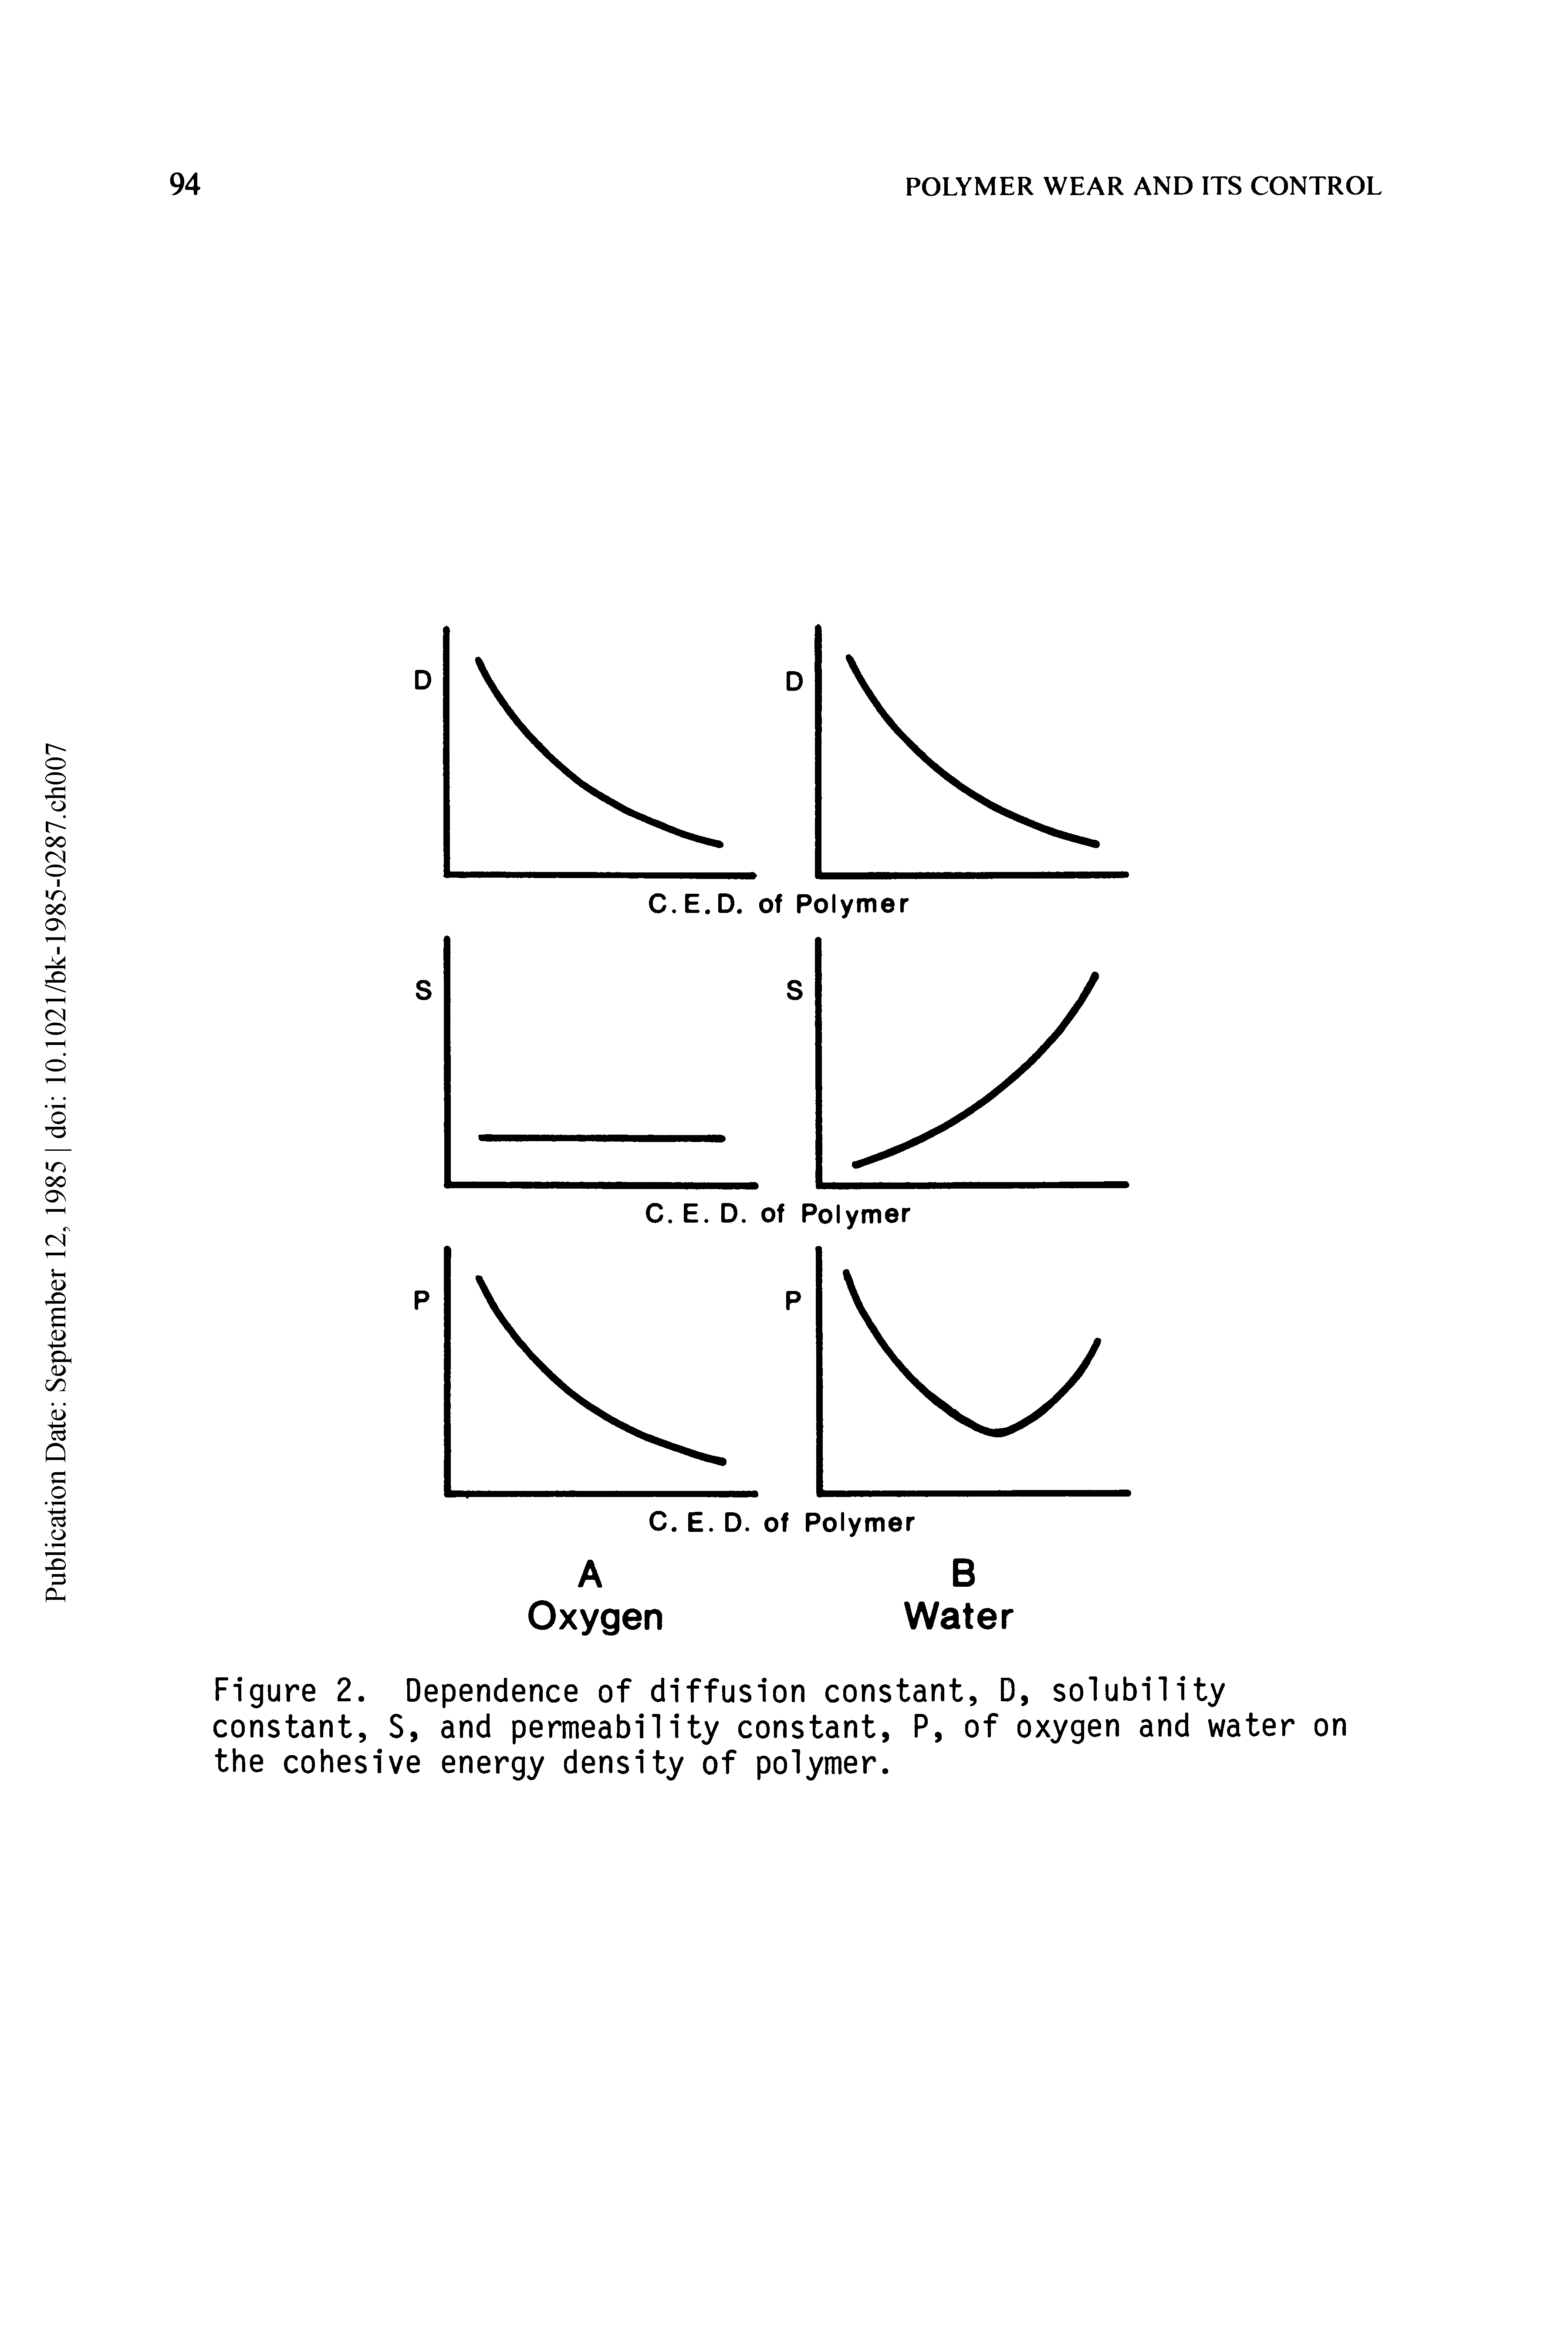 Figure 2. Dependence of diffusion constant, D, solubility constant, S, and permeability constant, P, of oxygen and water on the cohesive energy density of polymer.